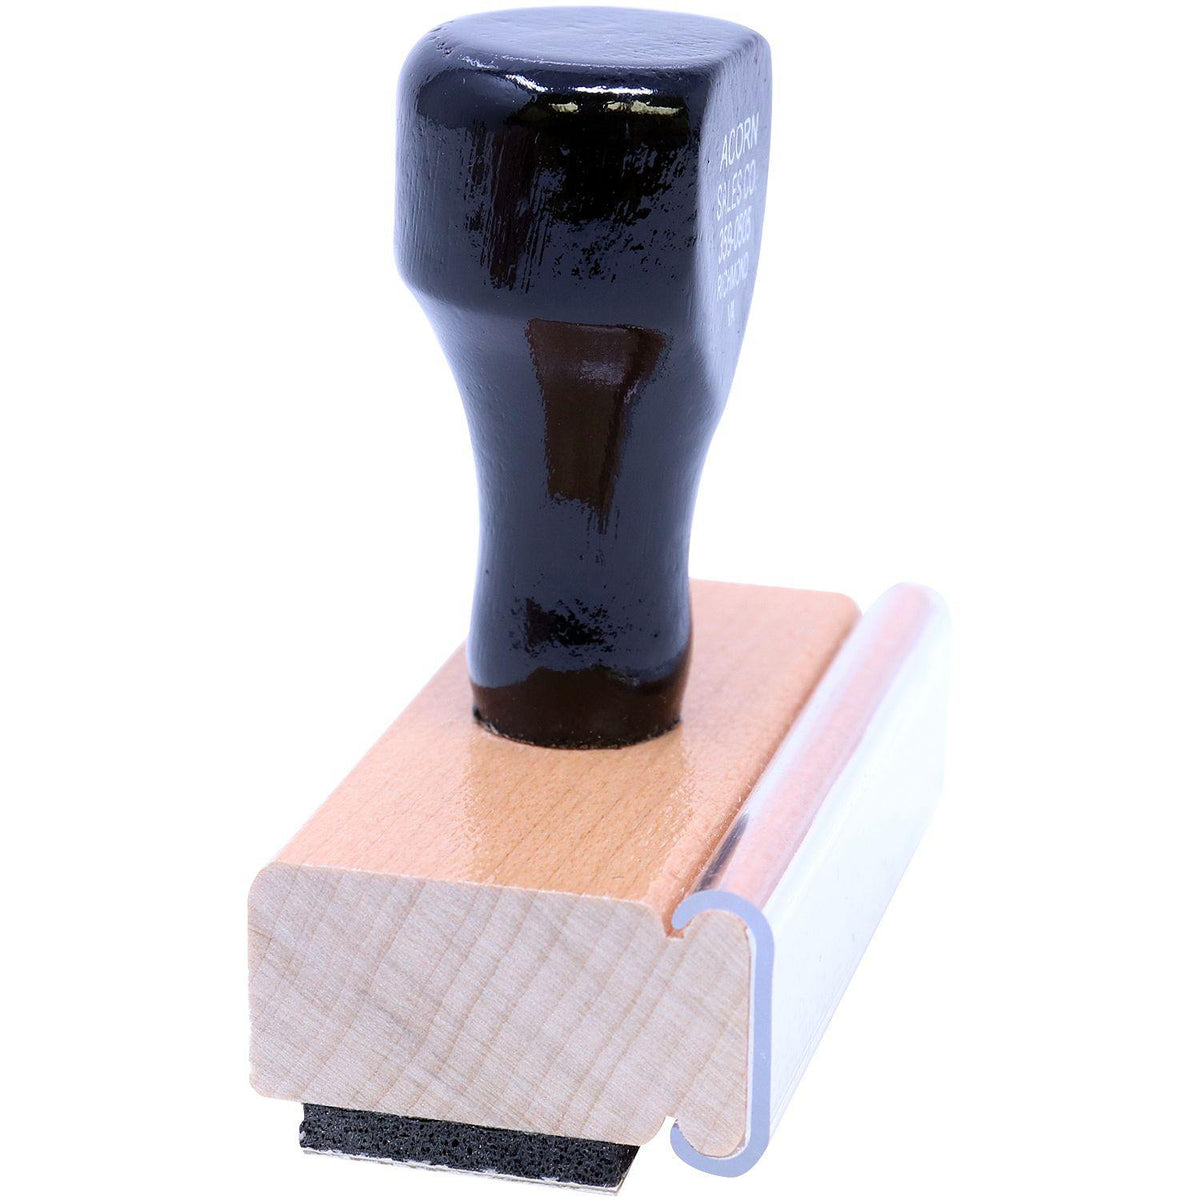 Side View of Large Barcode Confidential Rubber Stamp at an Angle